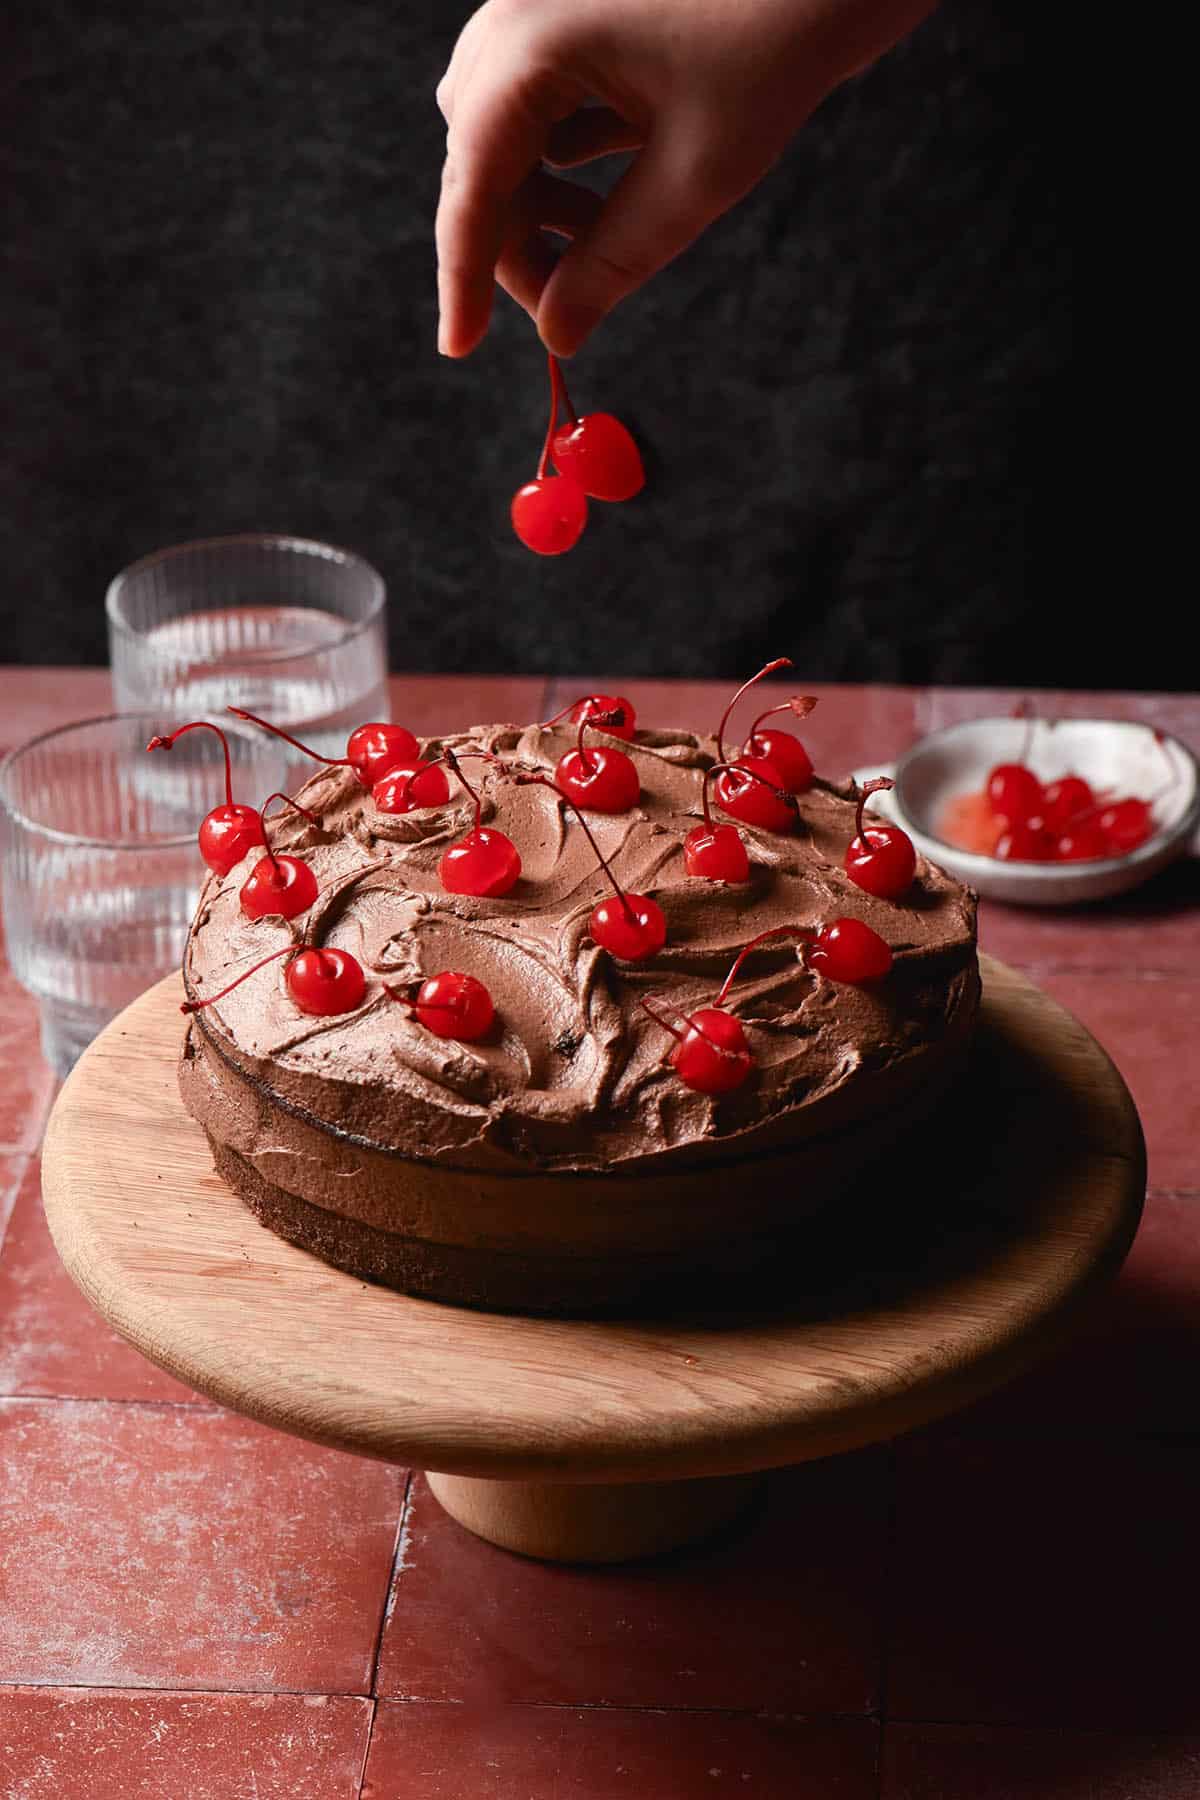 A side on image of a gluten free dairy free chocolate layer cake topped with dairy free chocolate buttercream and maraschino cherries. The cake sits atop a terracotta stone backdrop against a dark backdrop. A hand extends from the top of the image to add extra cherries onto the cake.